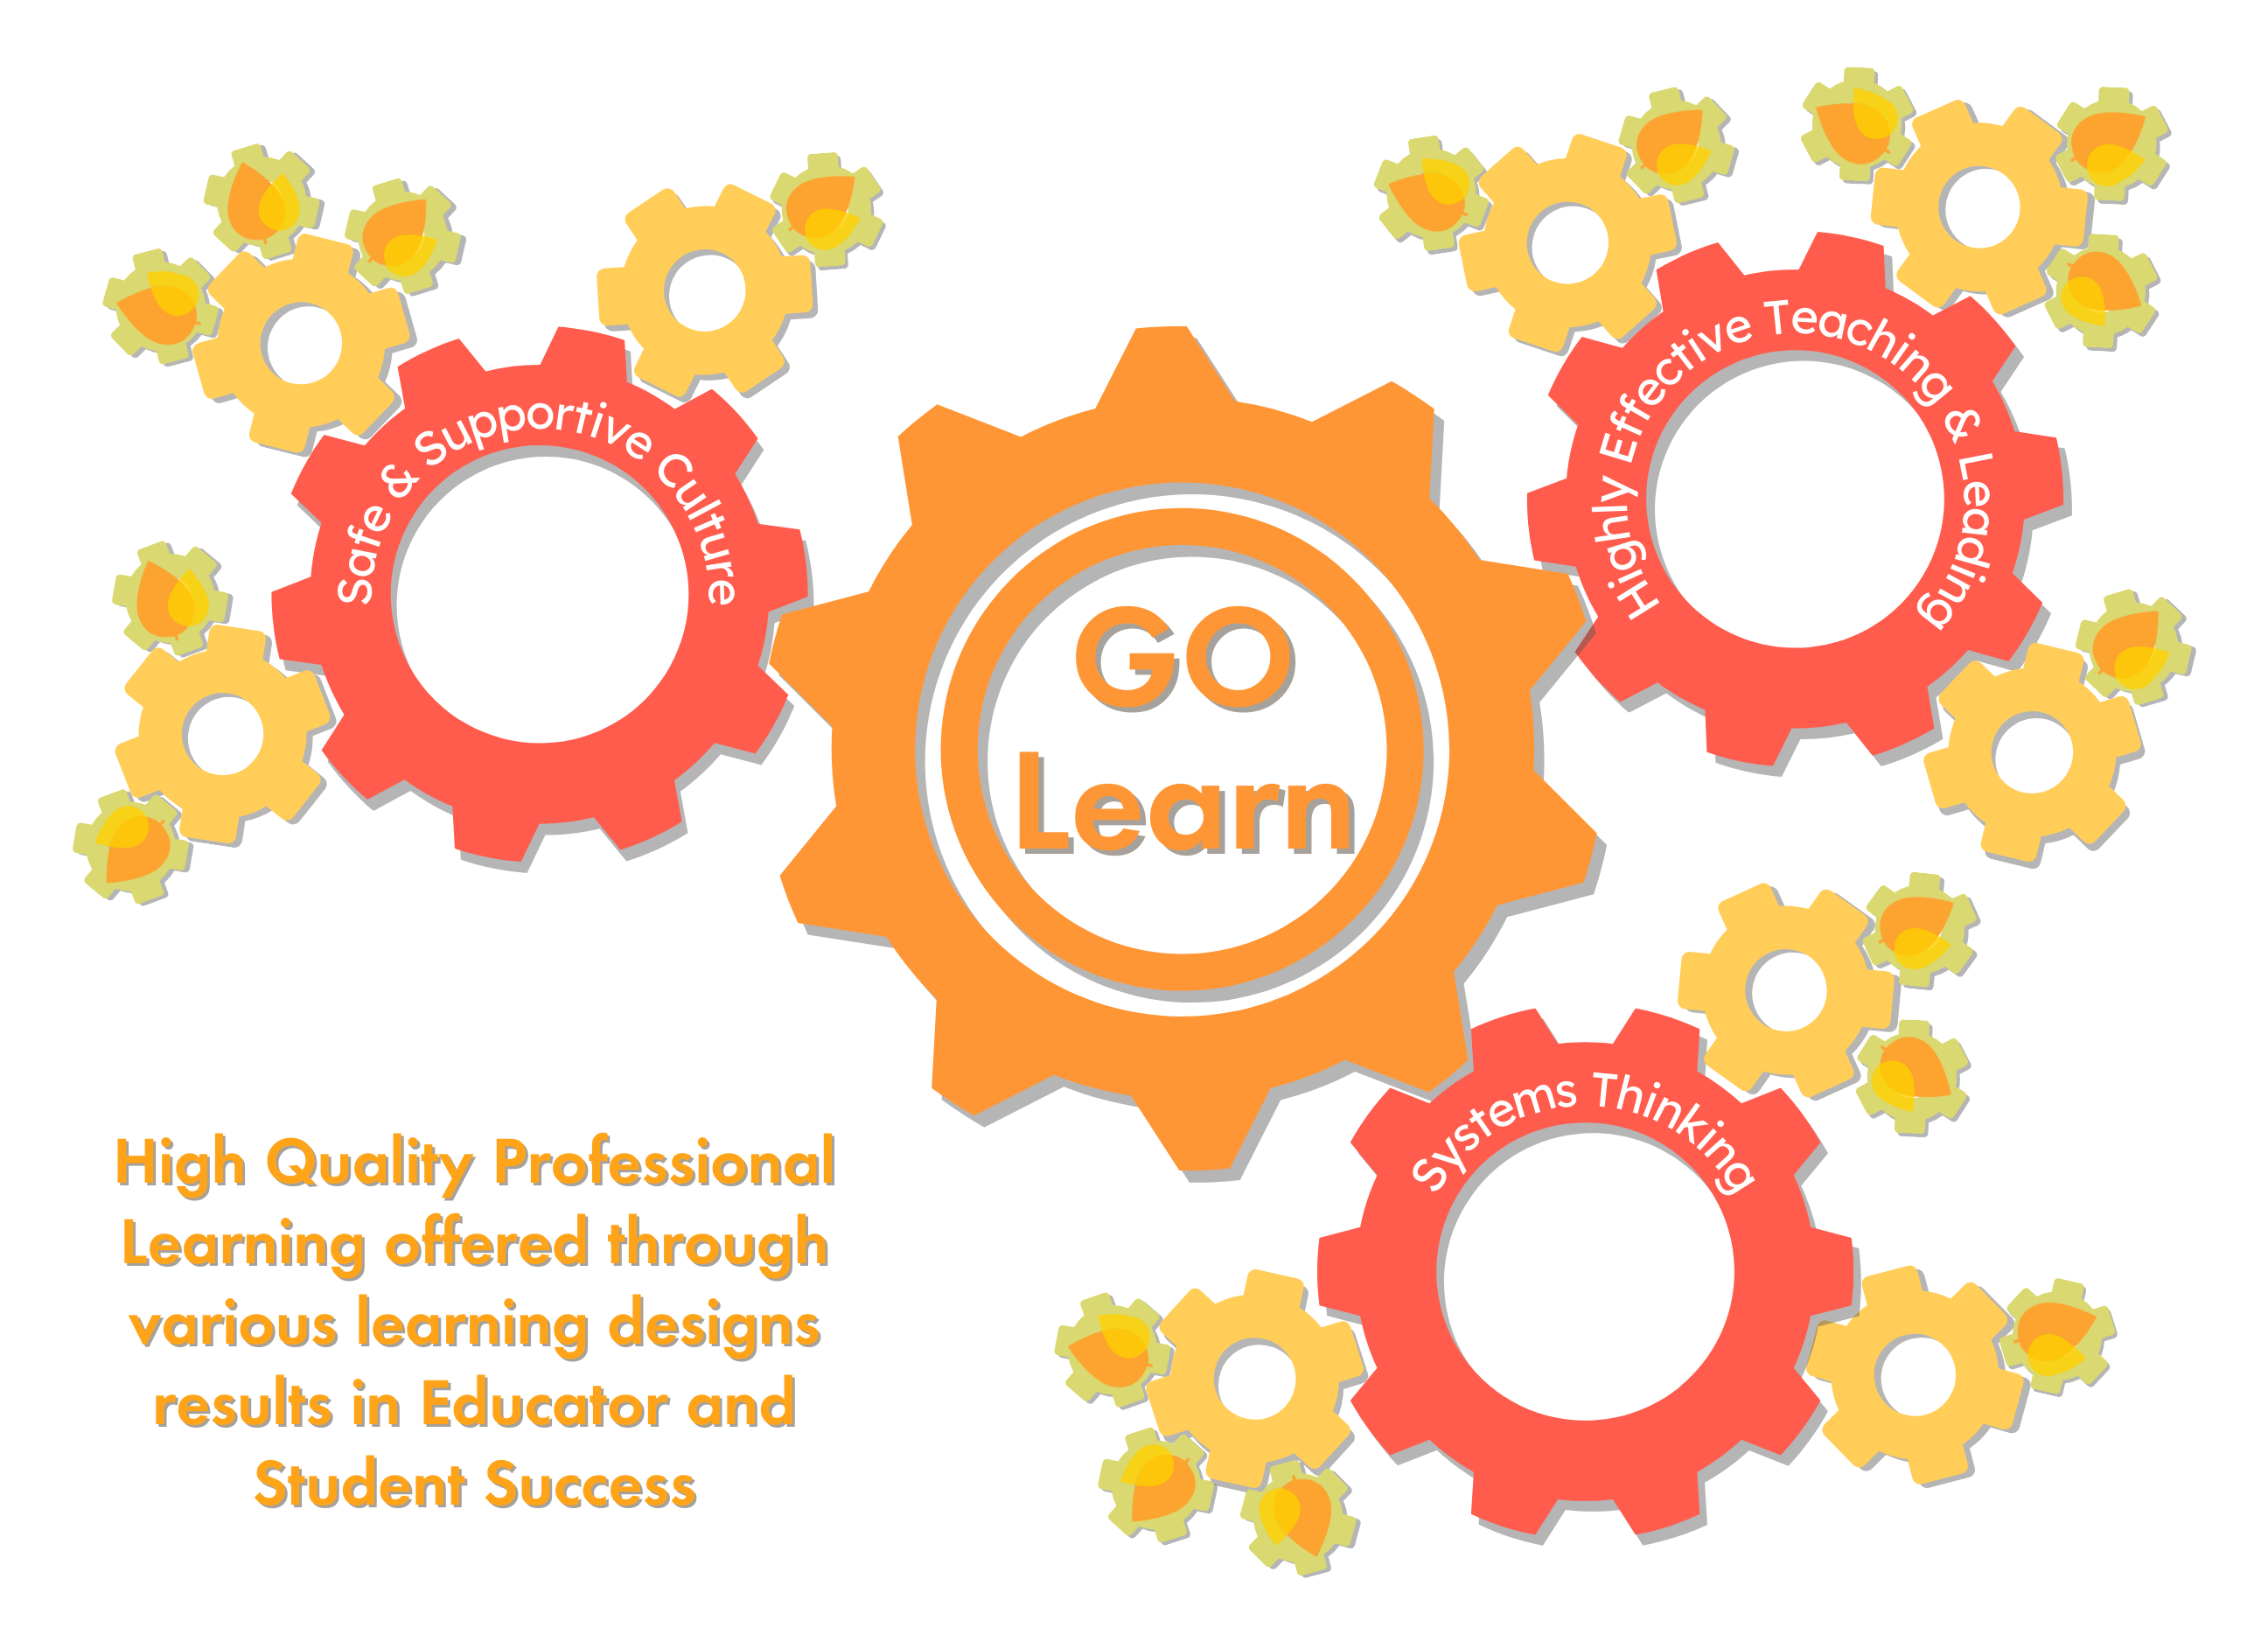 High Quality Professional Learning offered through various learning designs results in educator and student success